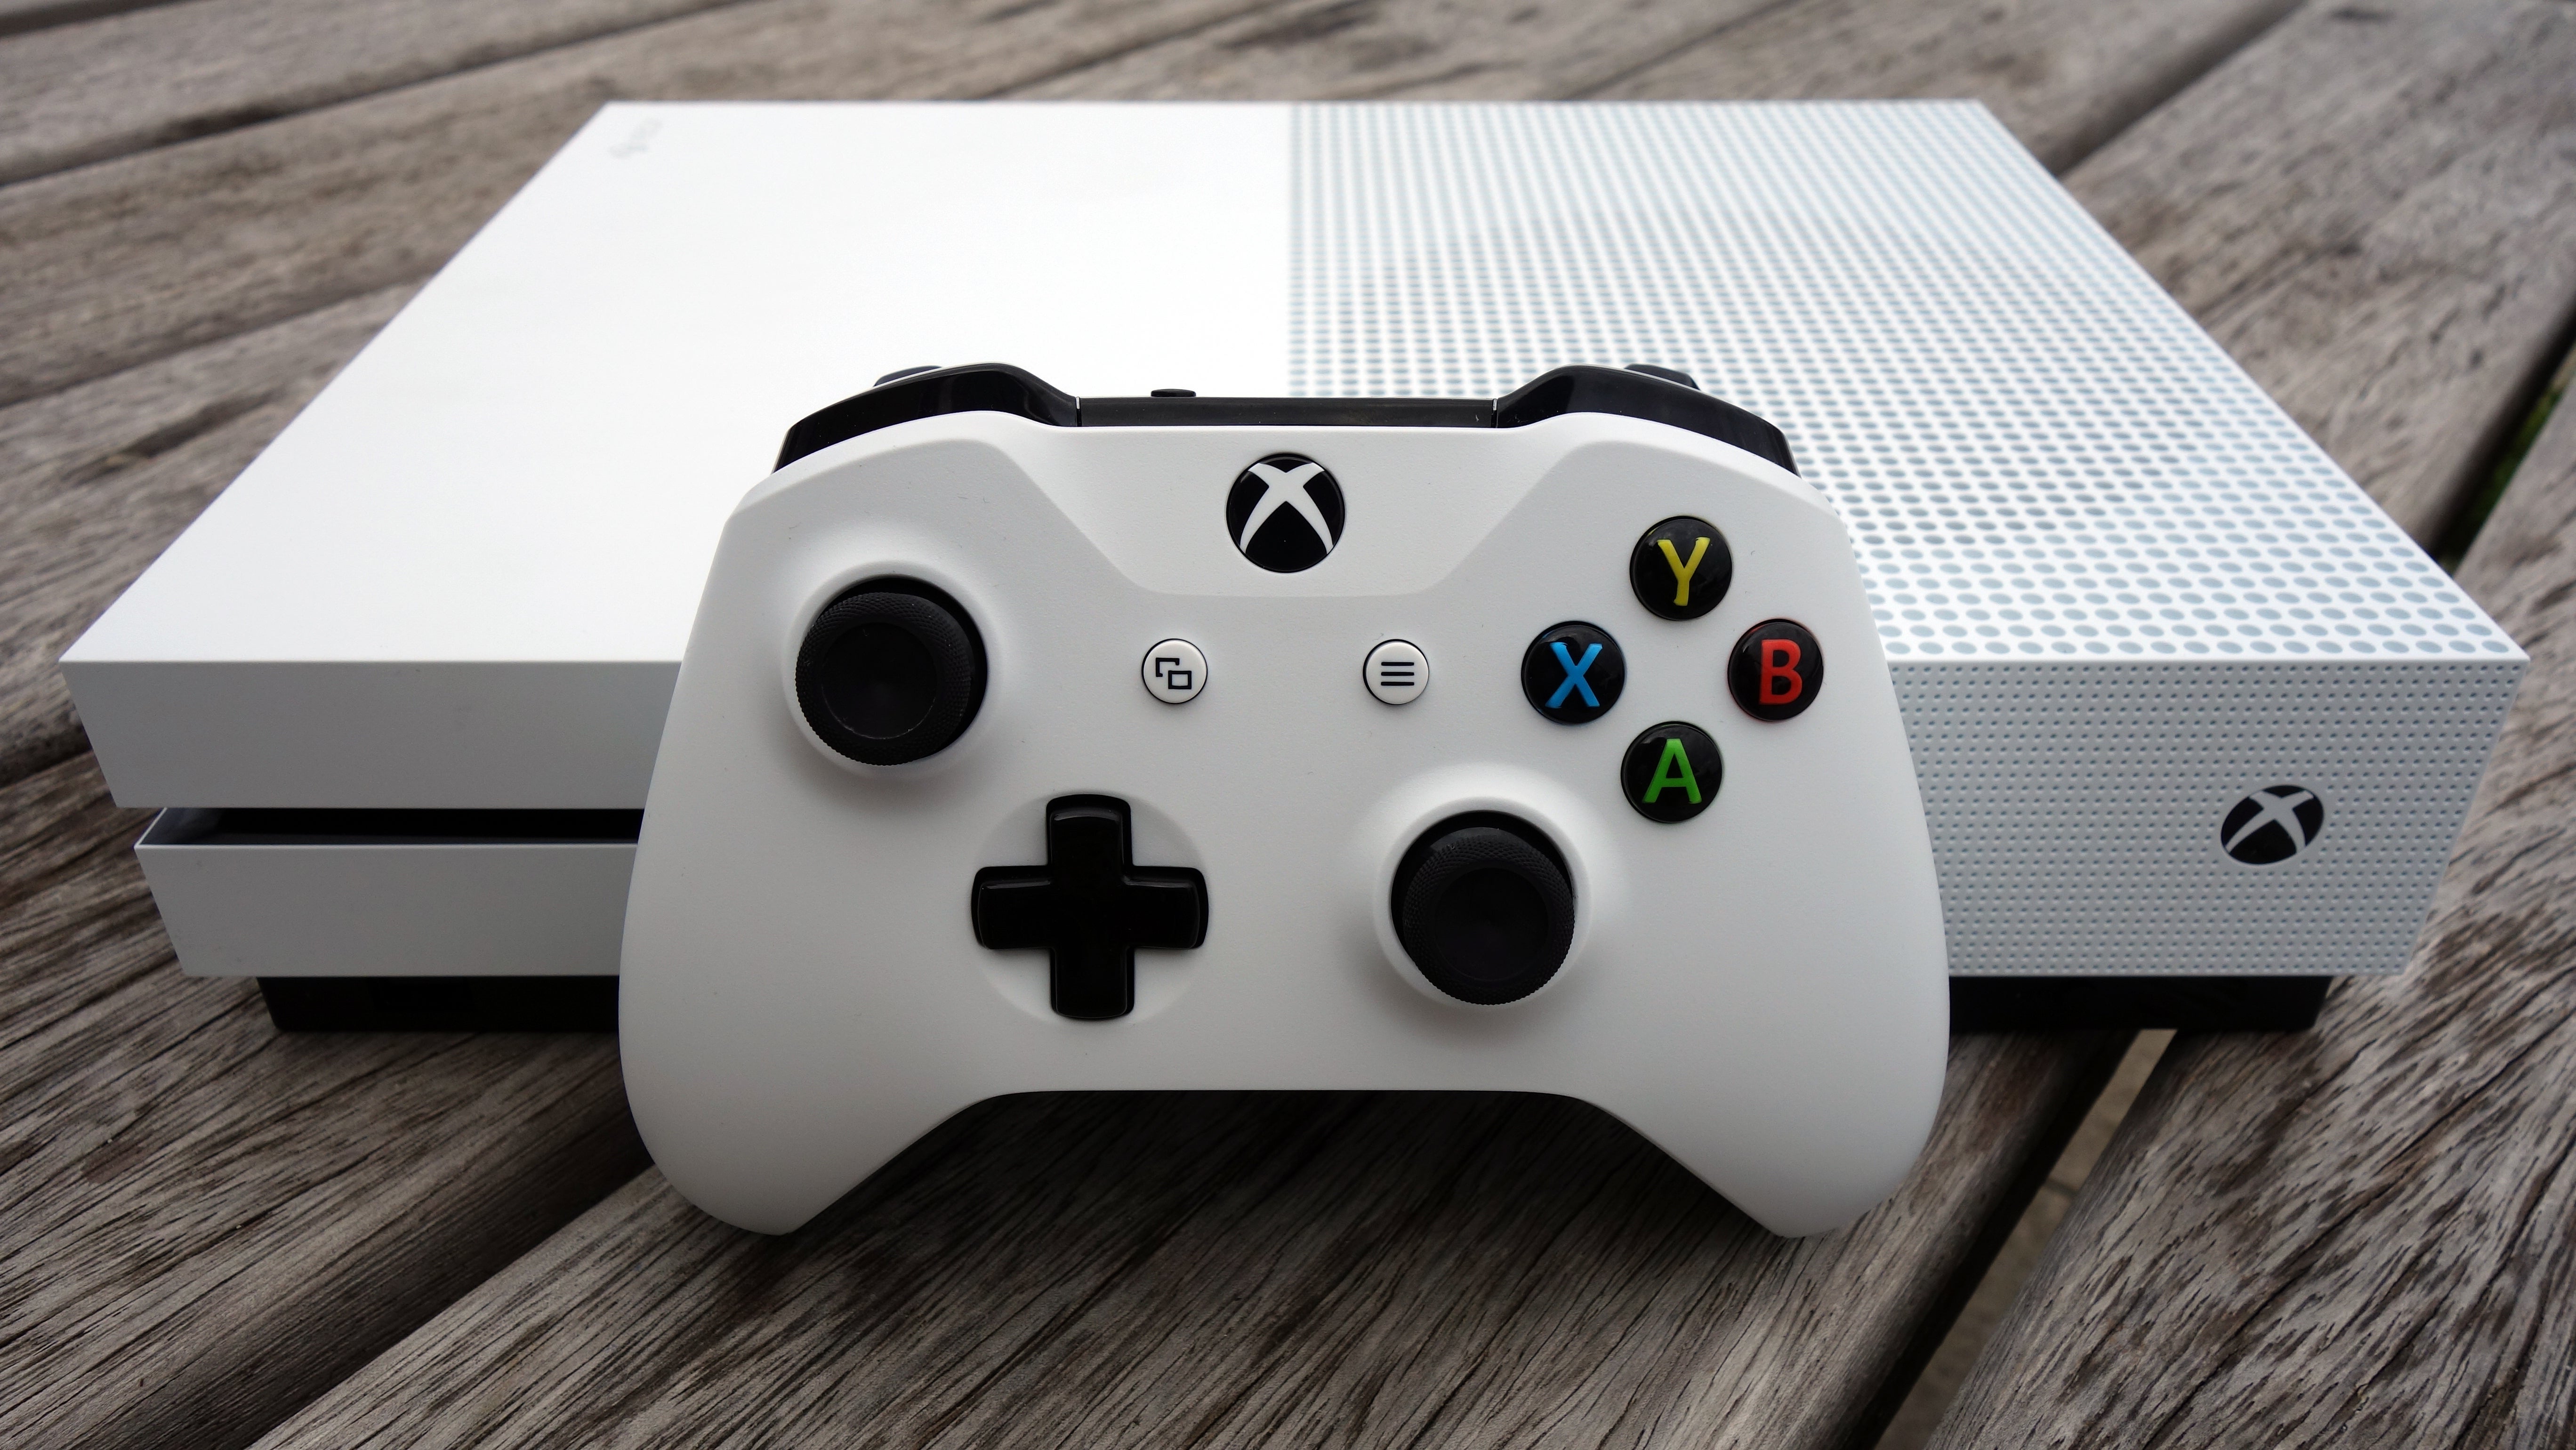 strak Bounty ledematen Xbox One S Review | Trusted Reviews